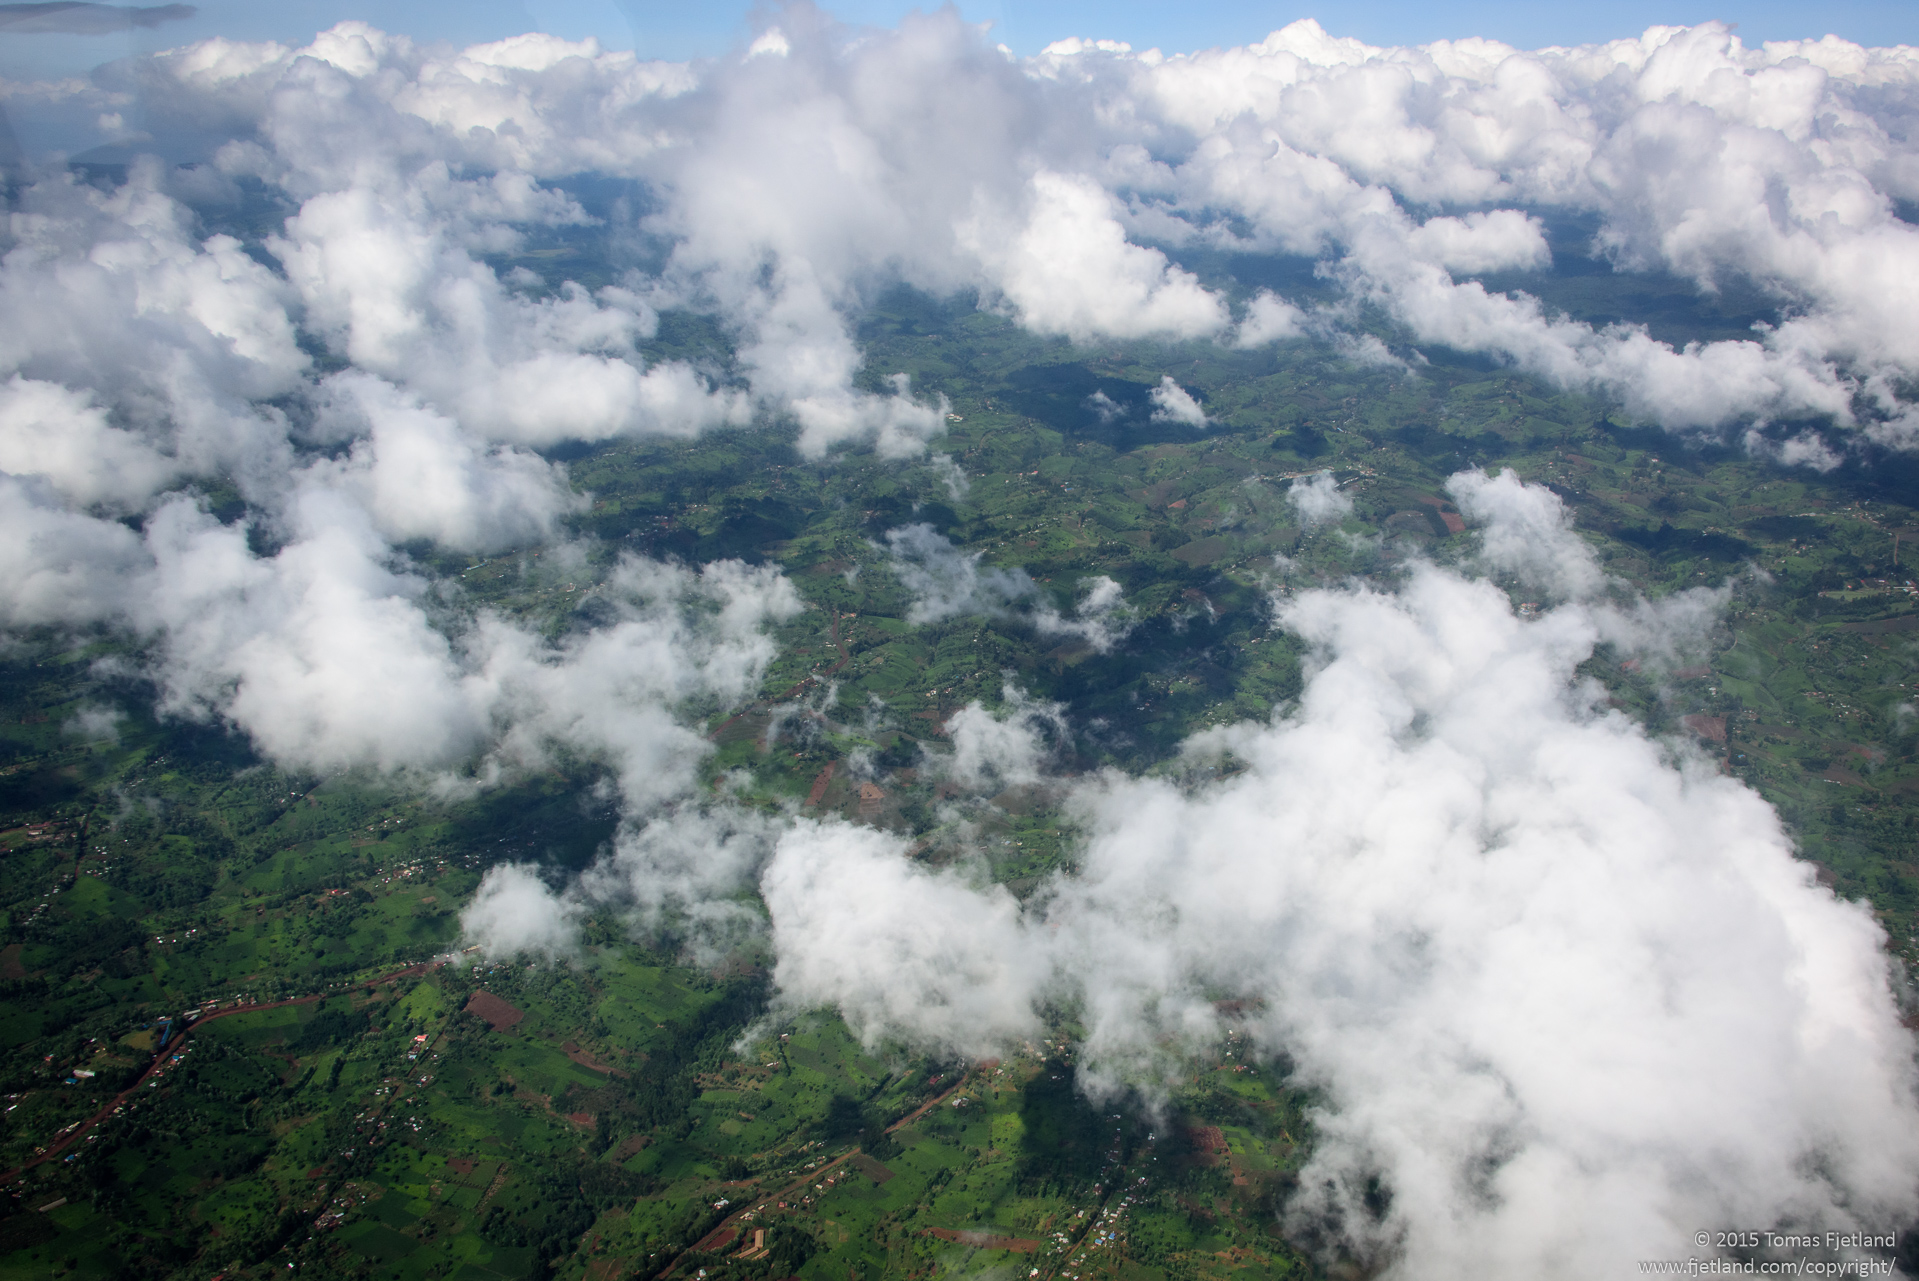 Patches of small farming plots seen from a plane heading north from Nairobi